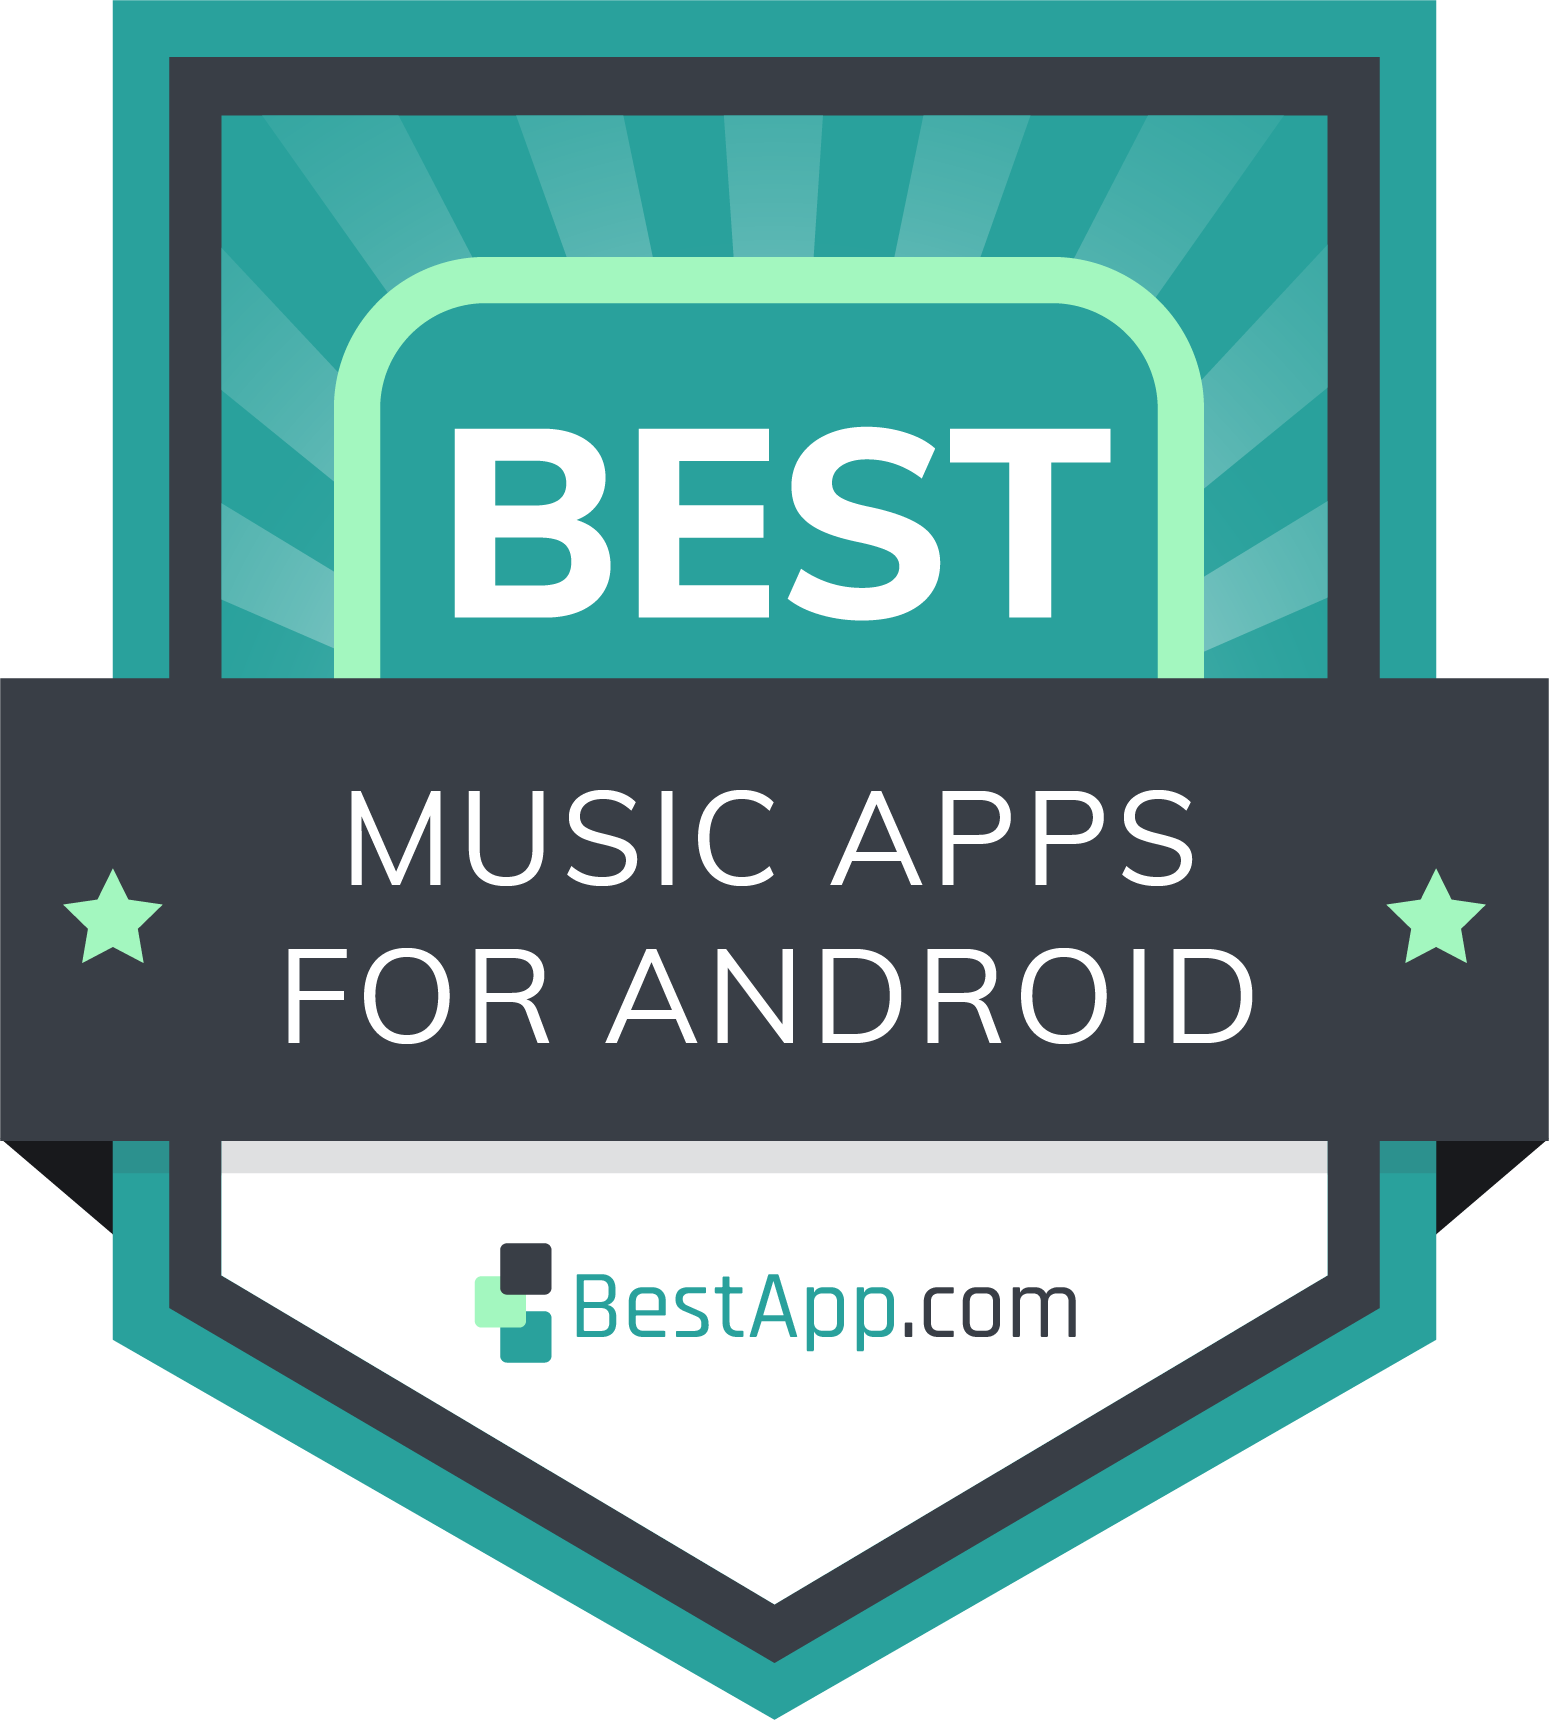 Best Music Apps for Android Badge